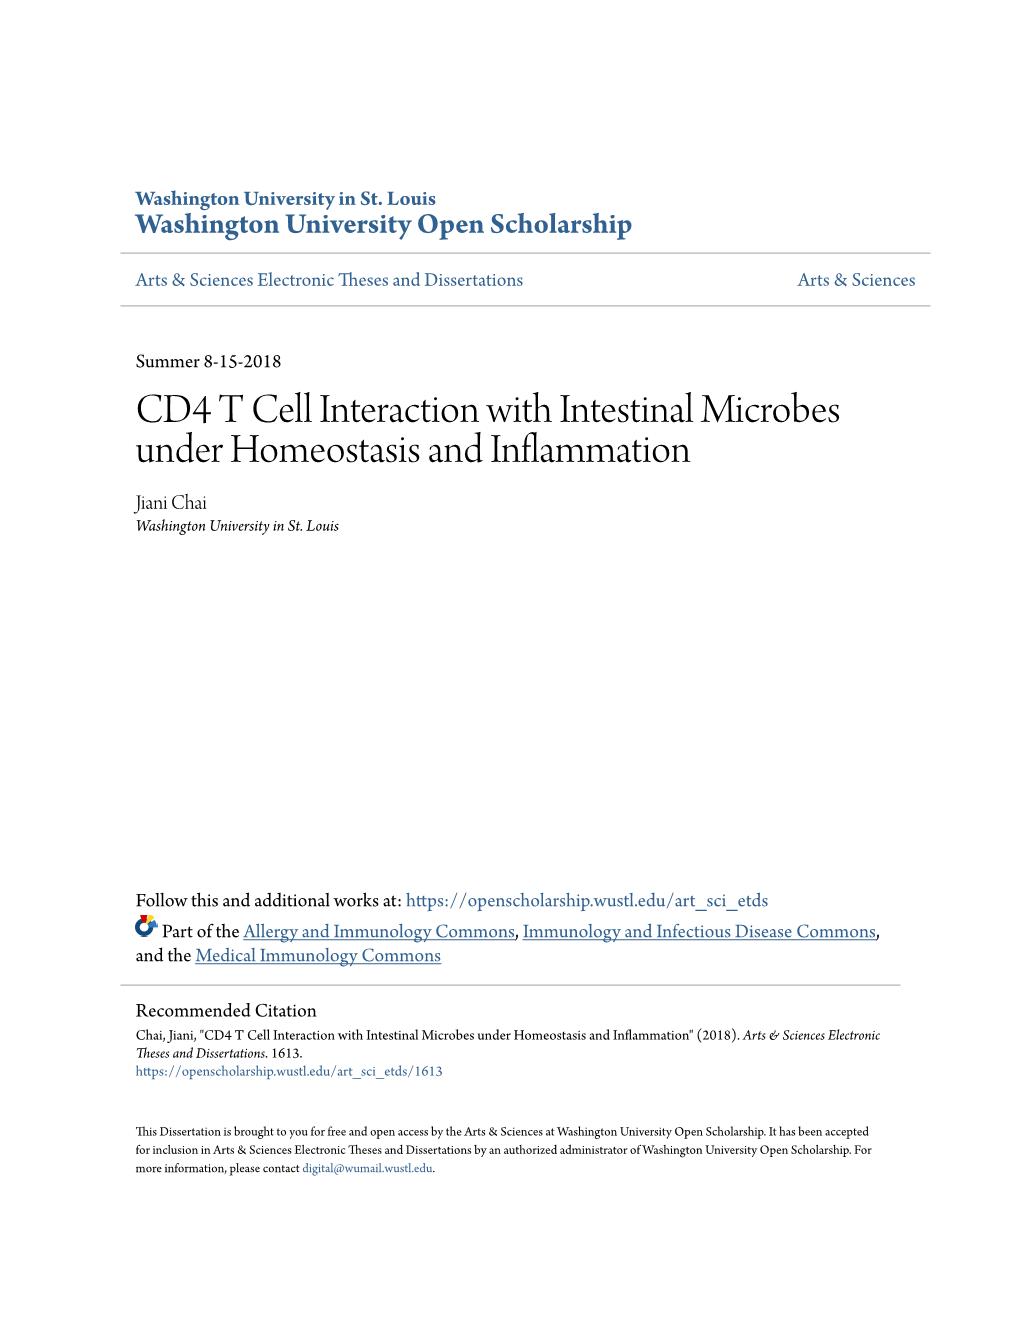 CD4 T Cell Interaction with Intestinal Microbes Under Homeostasis and Inflammation Jiani Chai Washington University in St